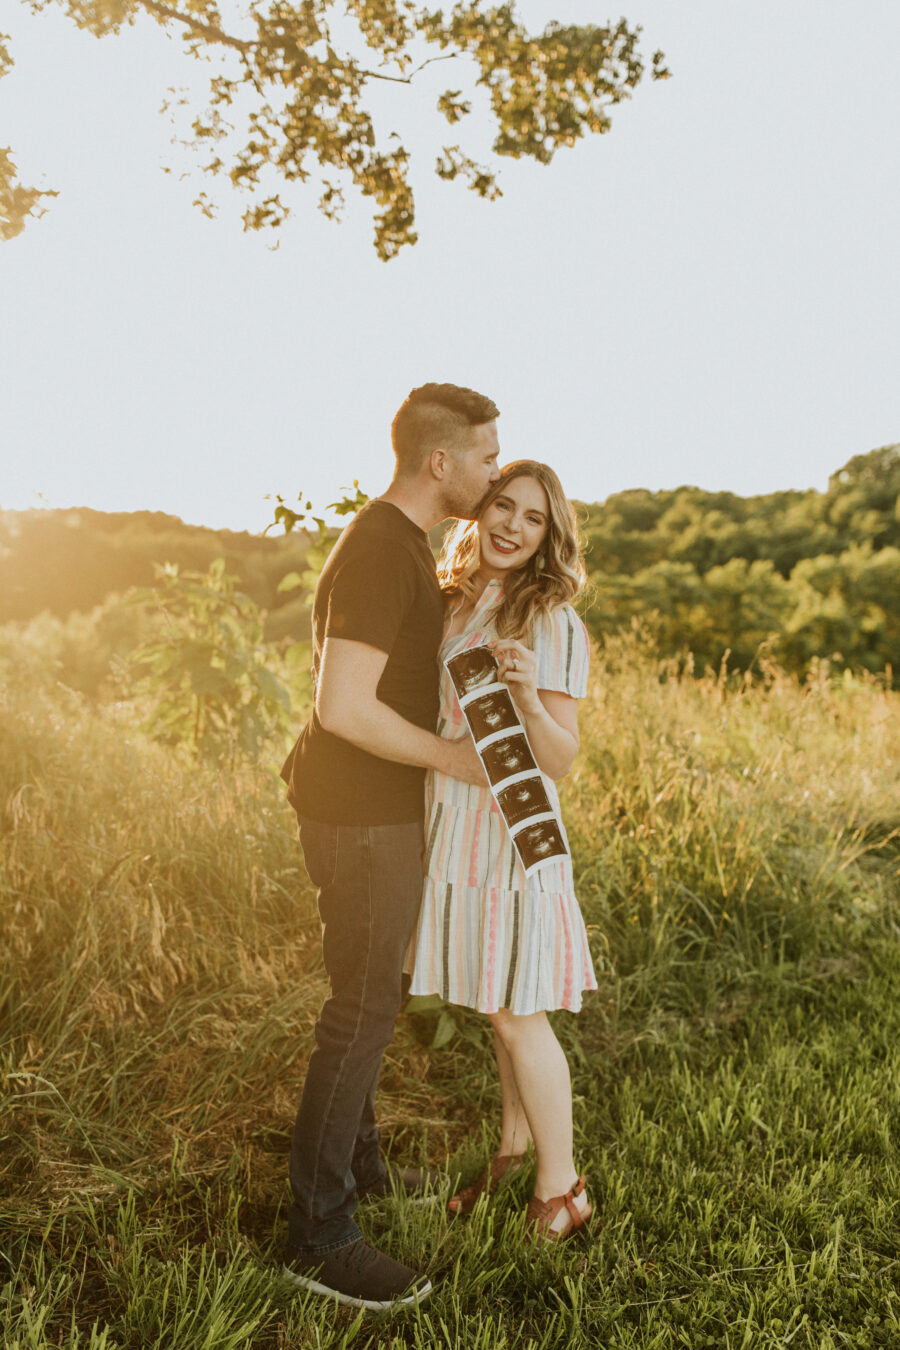 Sunlit Baby Announcement Photo Session featured on Nashville Baby Guide